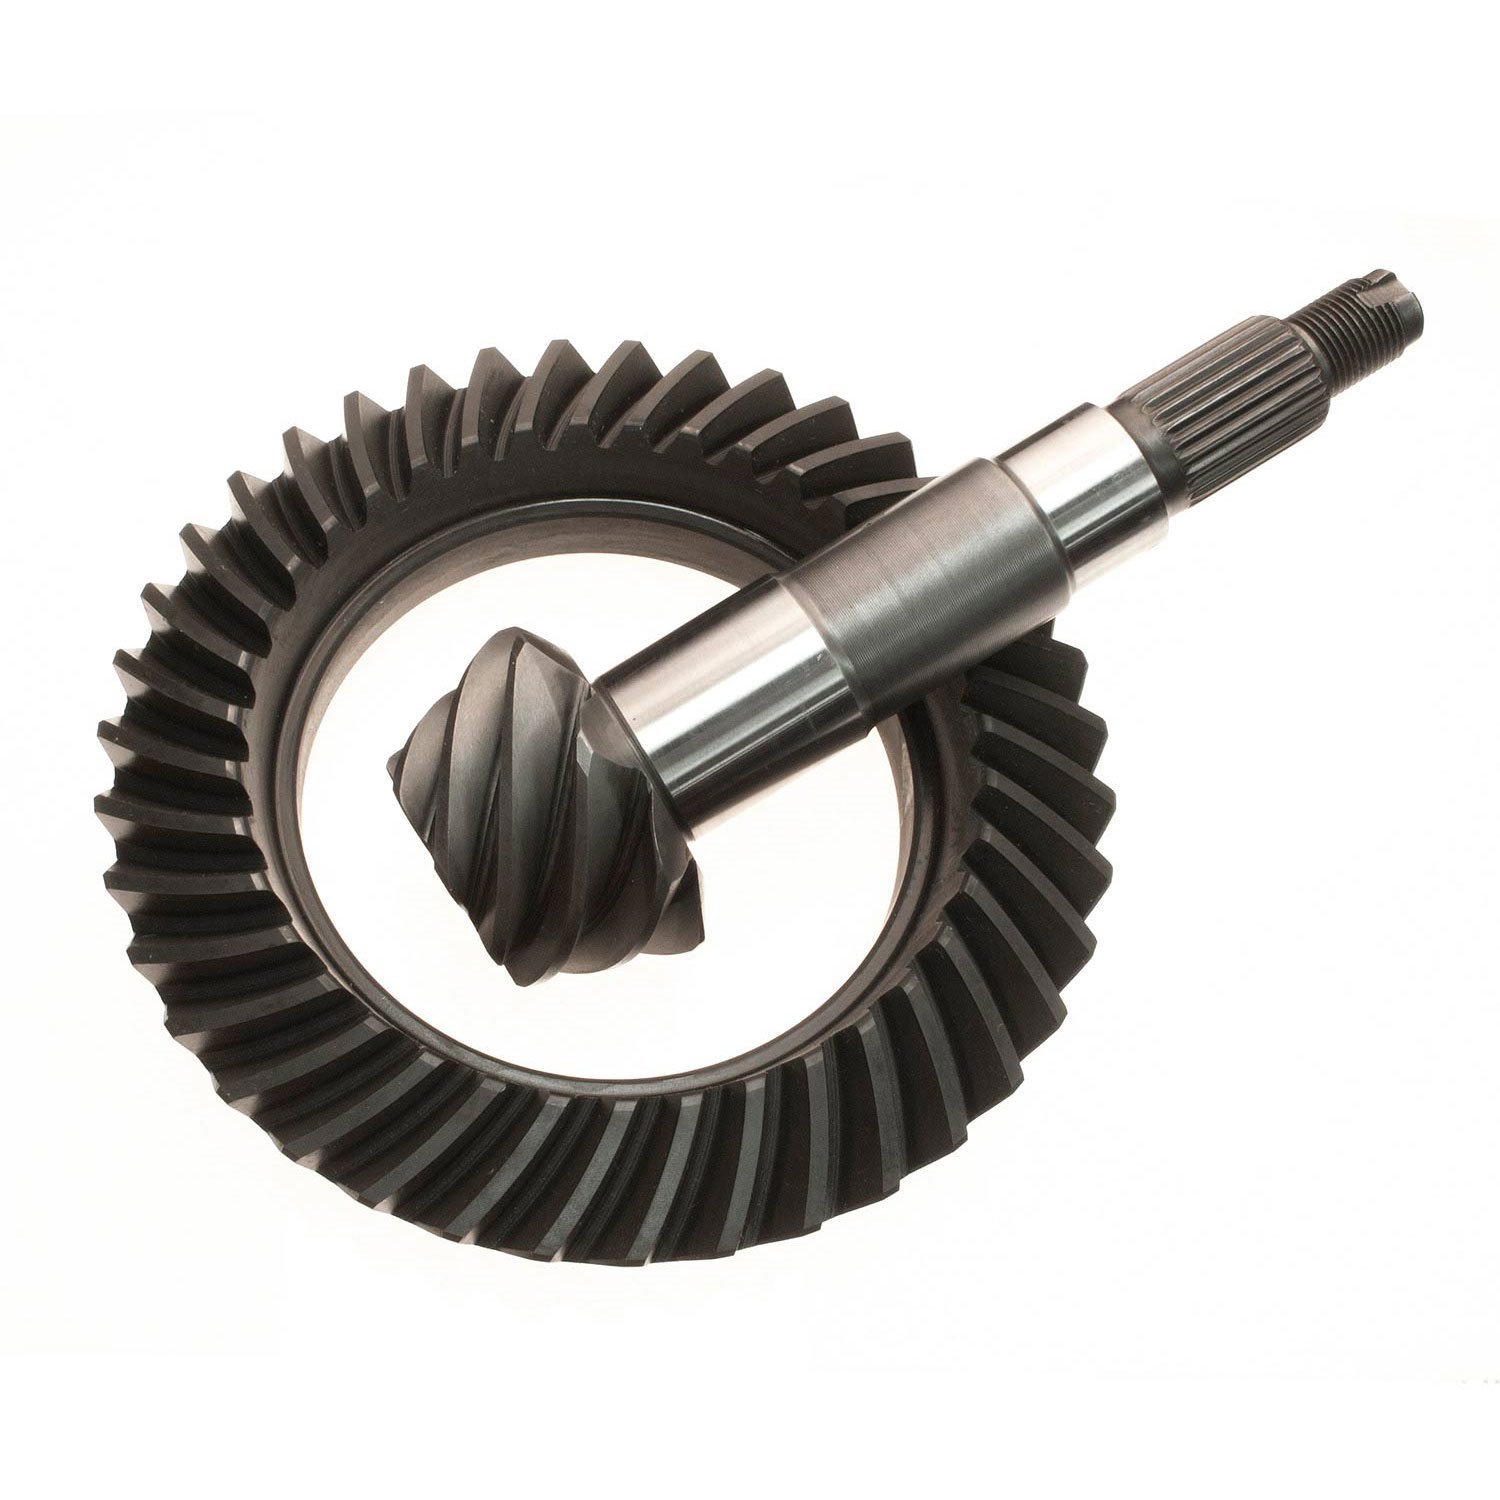 Ring & Pinion Gears 1979-Up Light Truck 4WD